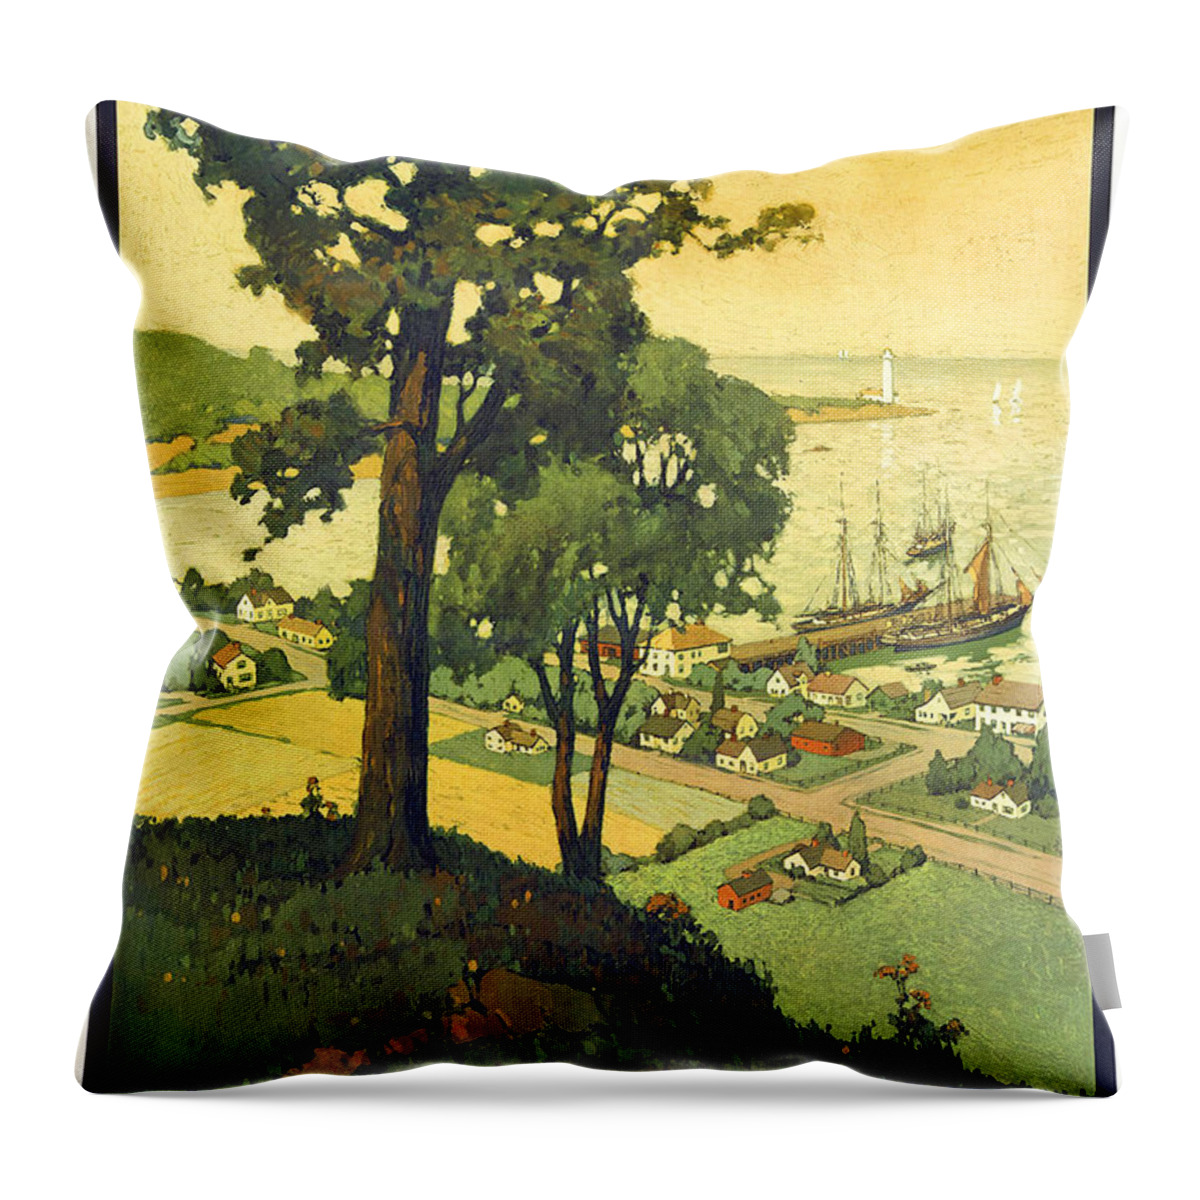 New England Throw Pillow featuring the painting New England, scenery from the port by Long Shot